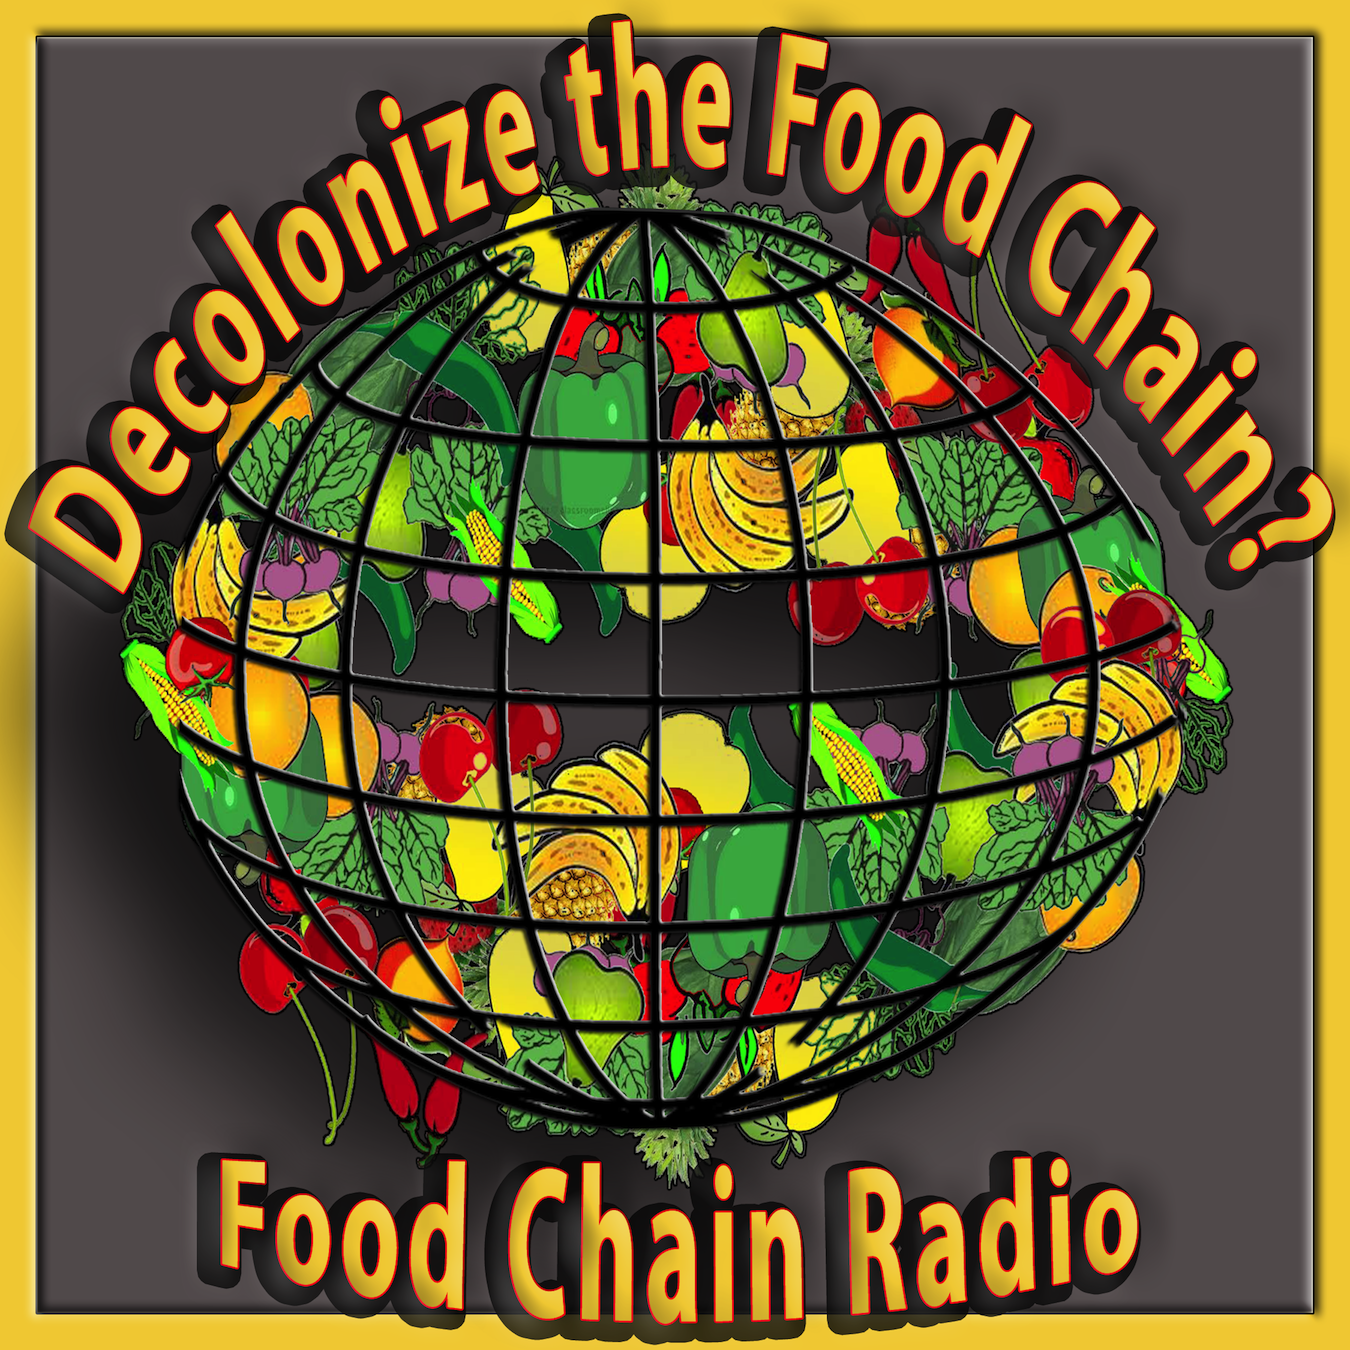 Michael Olson Food Chain Radio – Can the food system that feeds billions be decolonized?